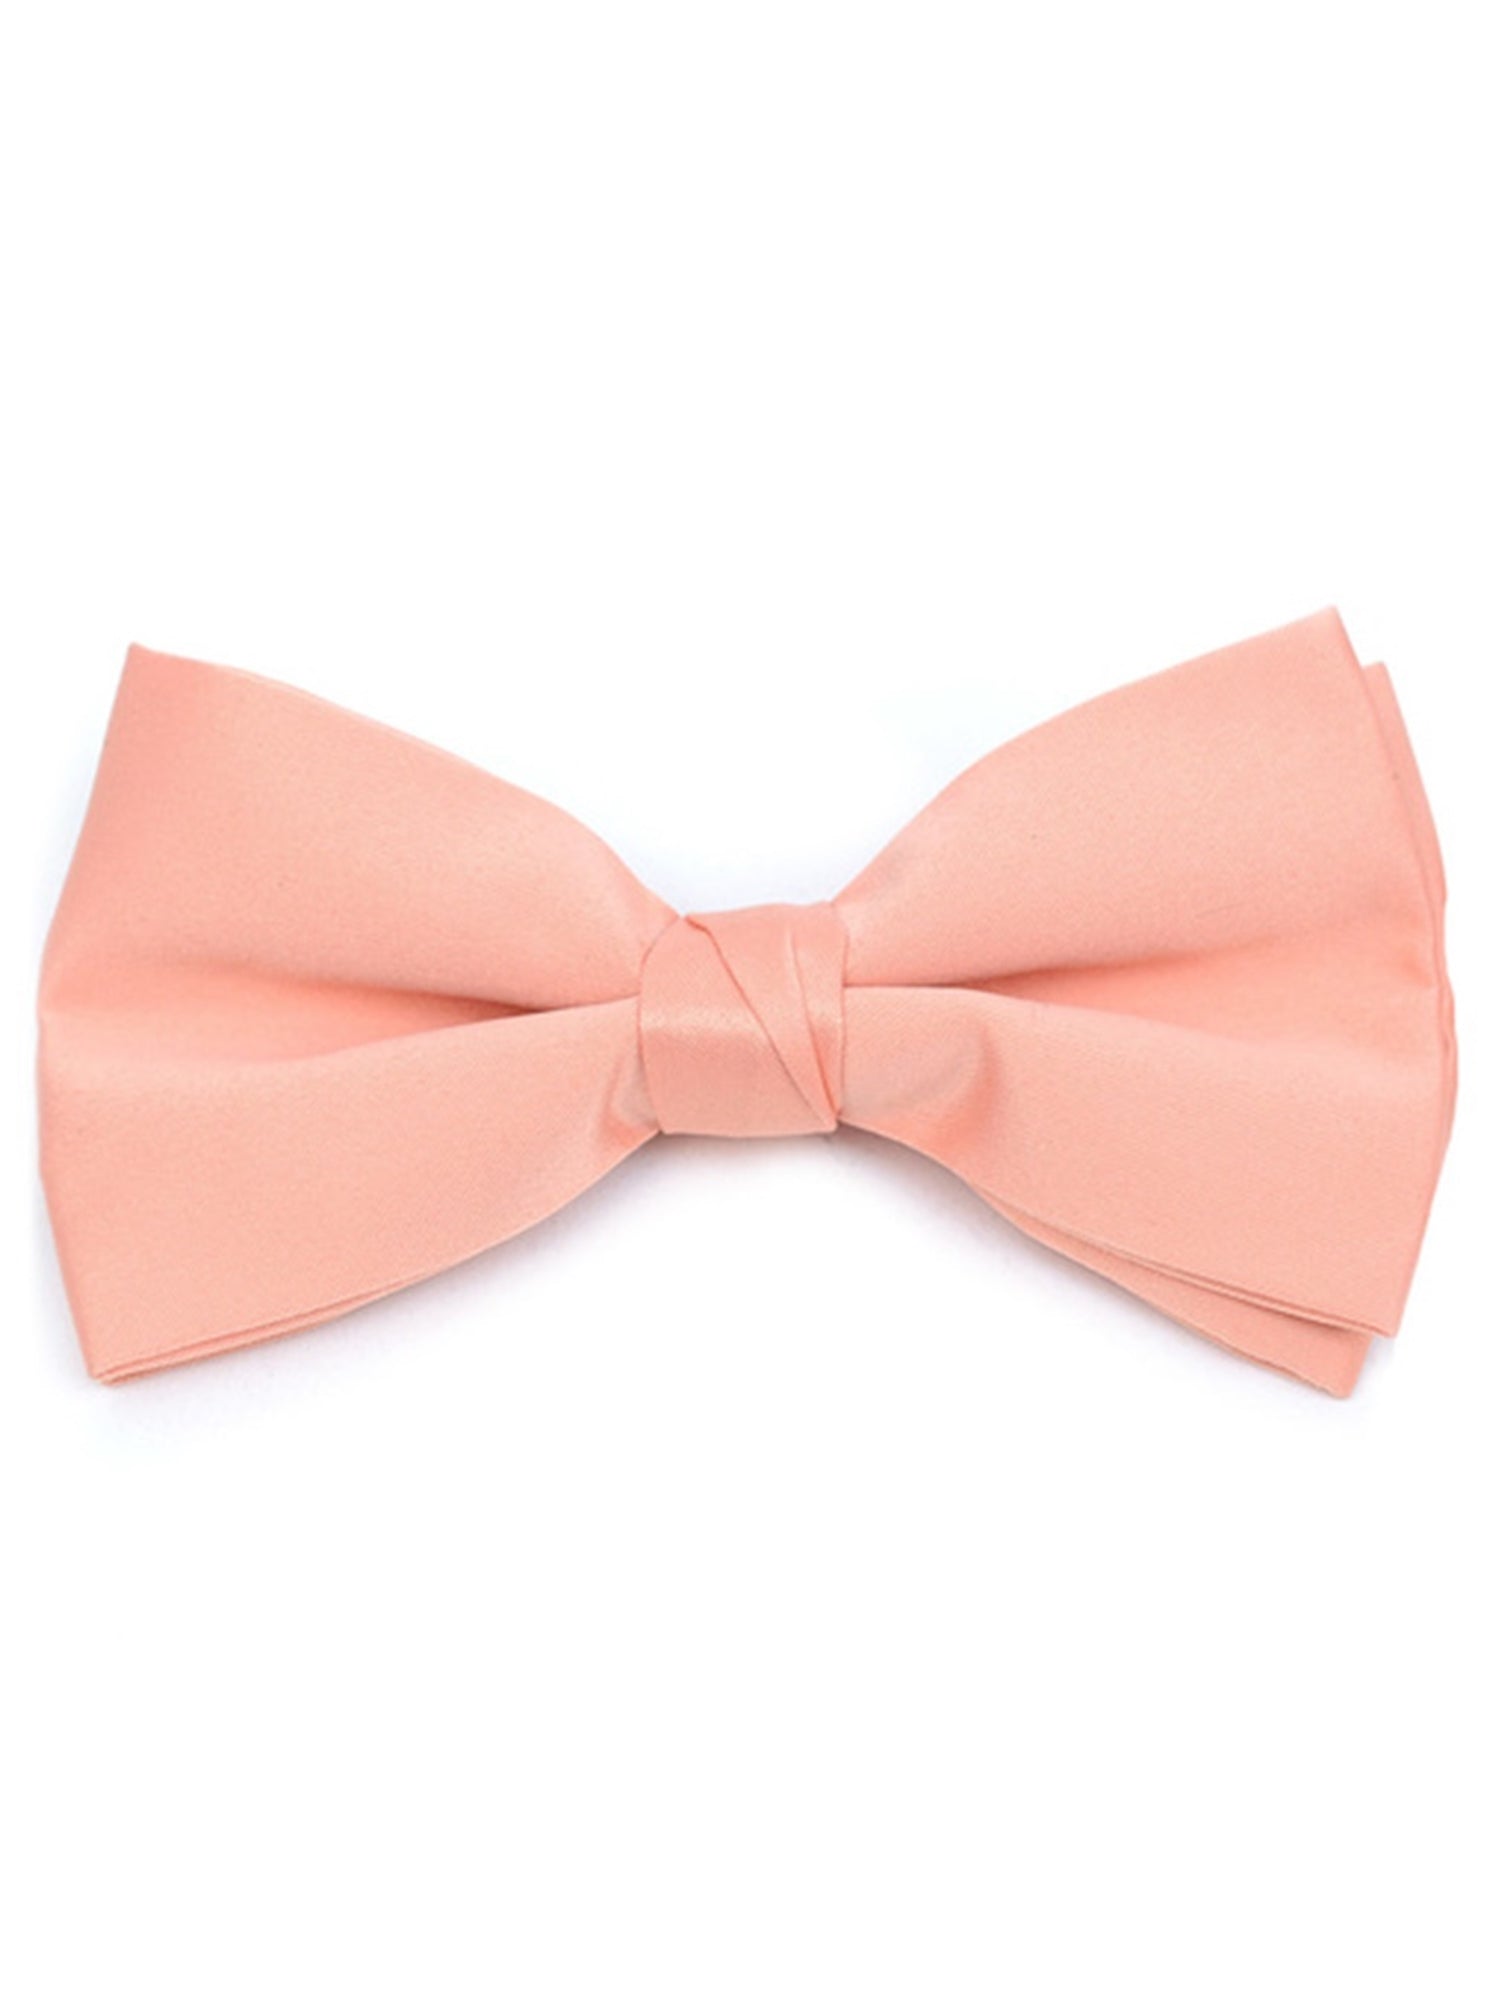 Men's Pre-tied Clip On Bow Tie - Formal Tuxedo Solid Color Men's Solid Color Bow Tie TheDapperTie Coral One Size 